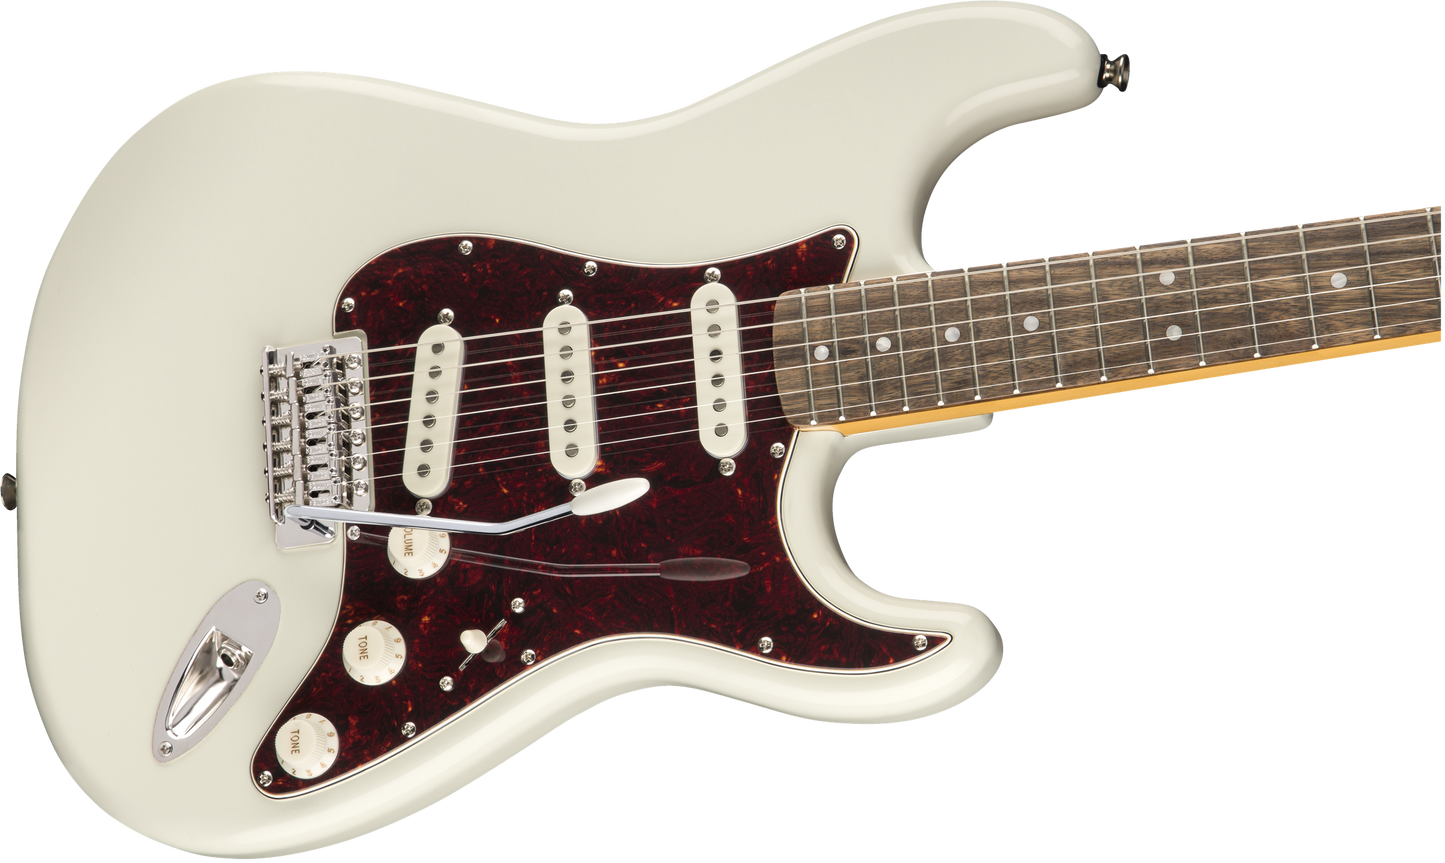 Squier Classic Vibe 60s Stratocaster Electric Guitar - Olympic White - Joondalup Music Centre